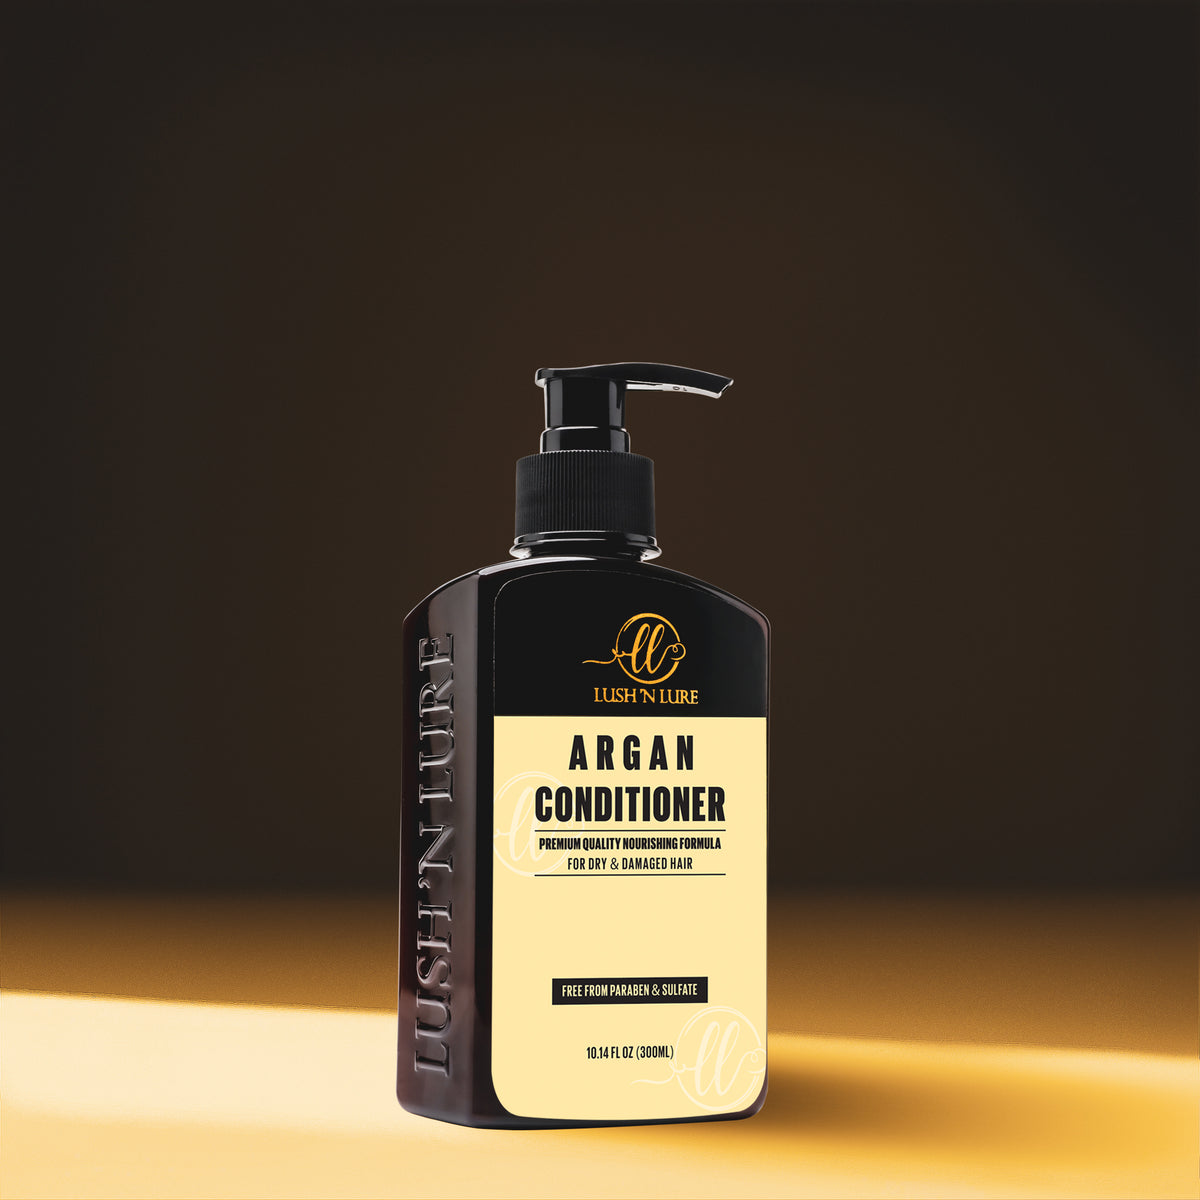  "Image showcasing LUSH 'N LURE Sulfate & Paraben Free Argan Conditioner, a luxurious formula enriched with argan oil for smooth, hydrated hair."